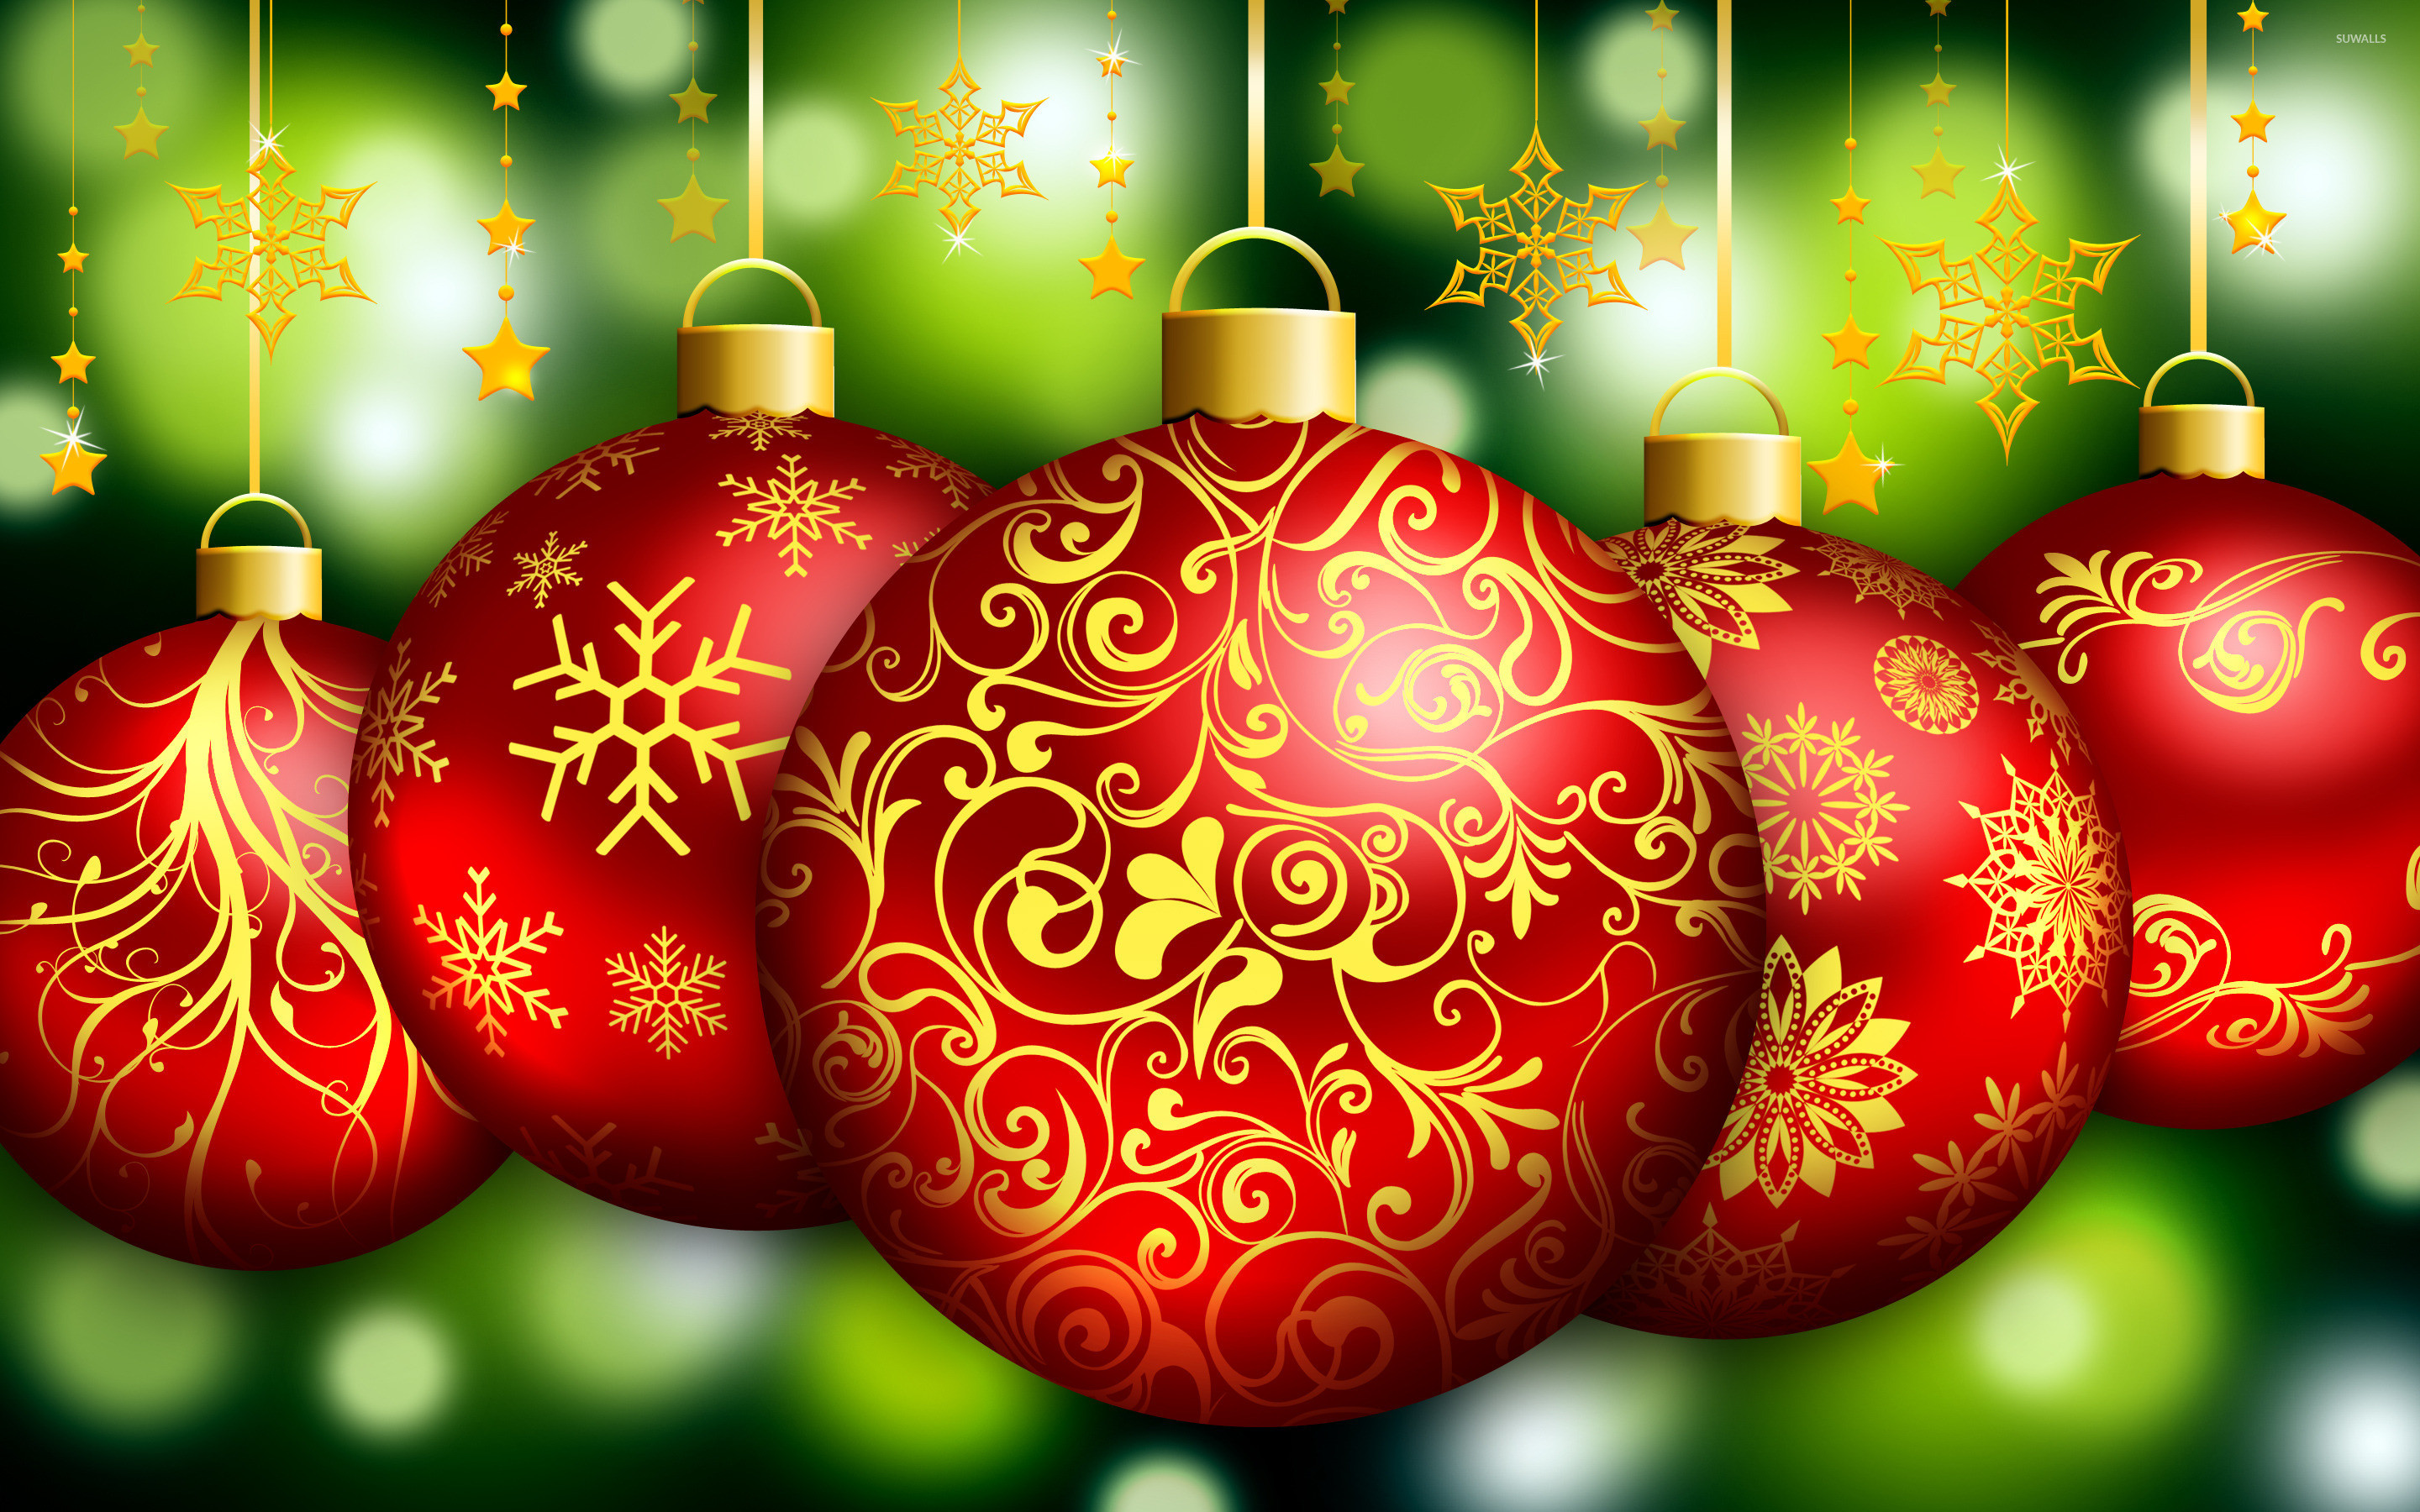 Christmas Ornaments Wallpaper (71+ images)
